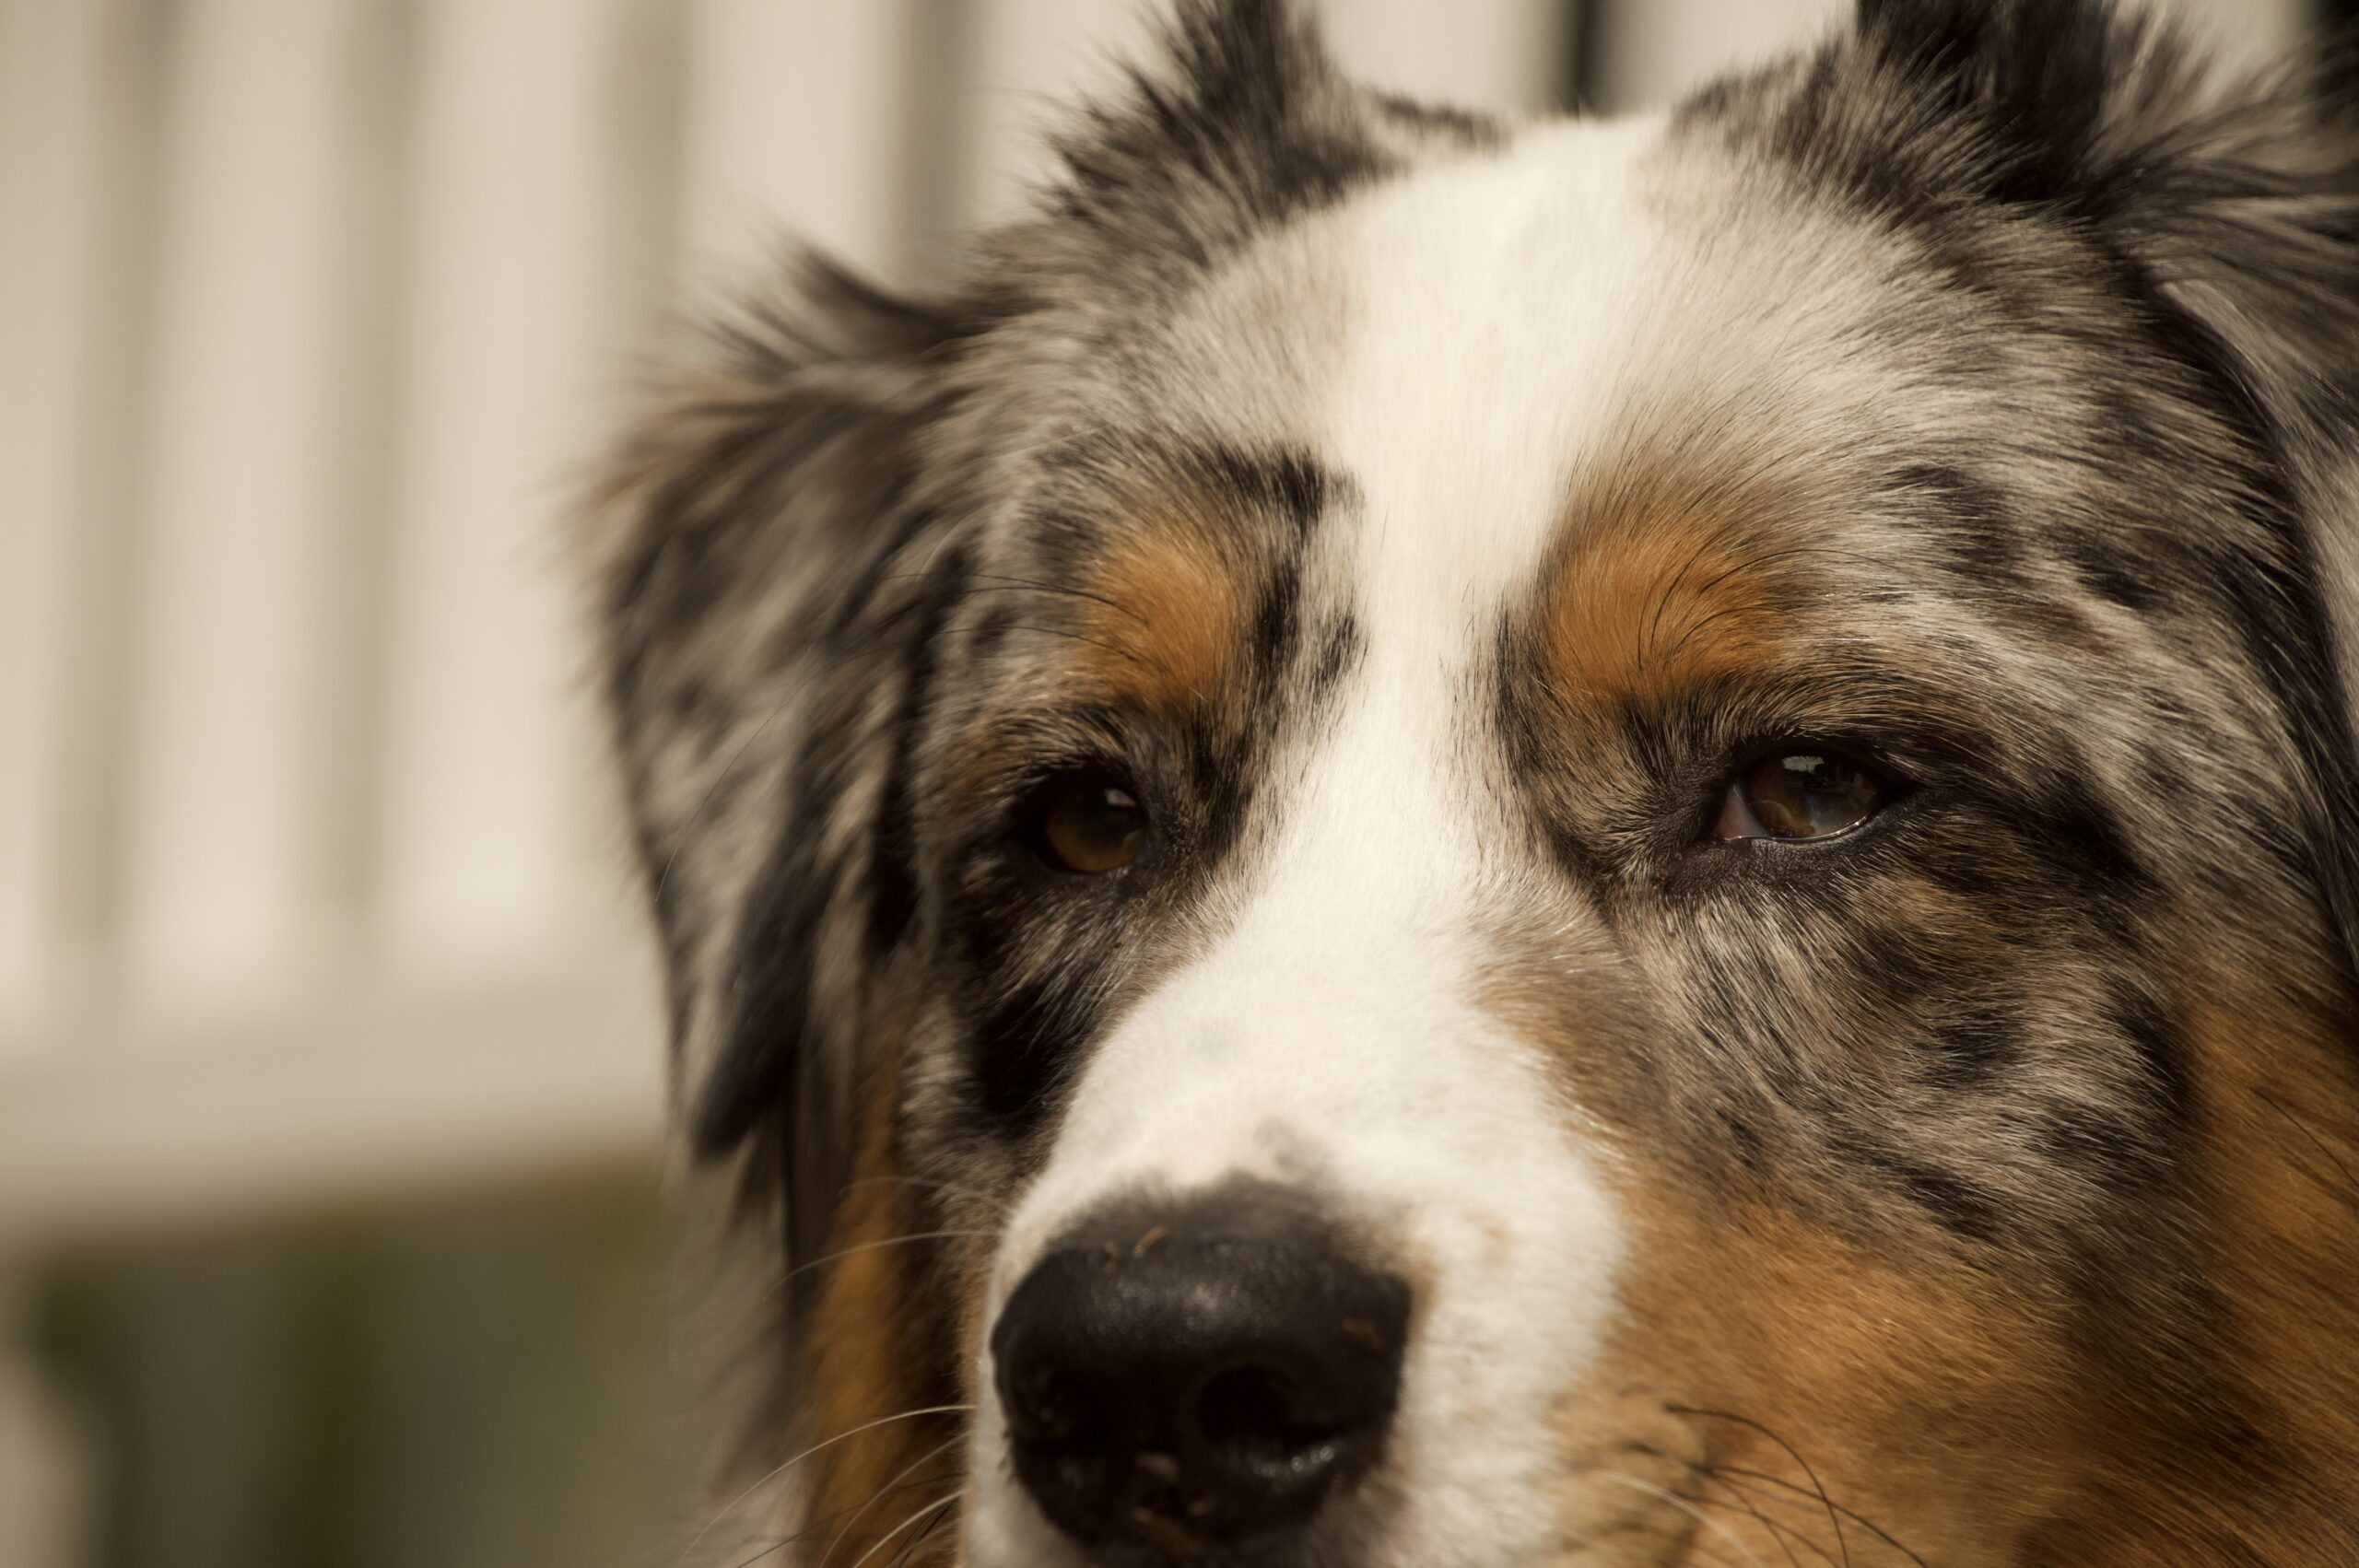 Close up focused image of an Australian shepherds face